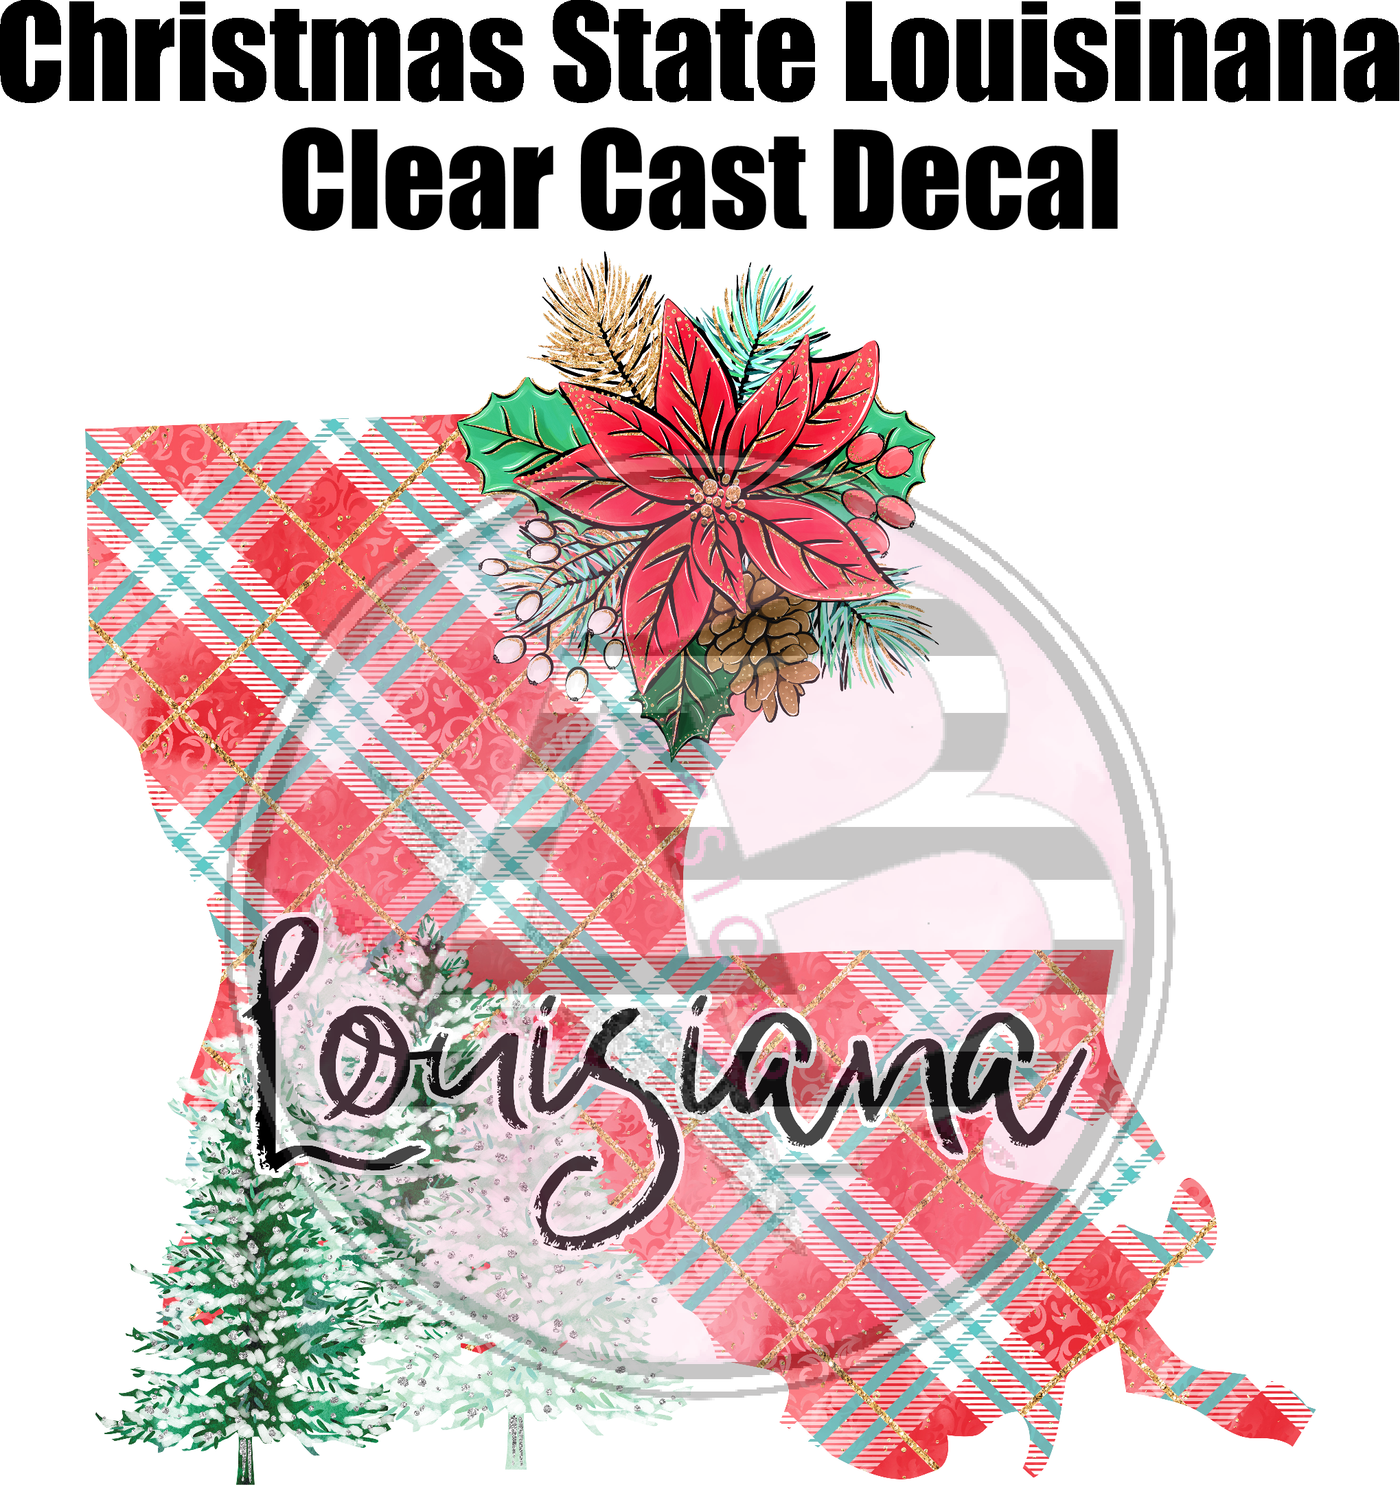 Christmas State Louisiana - Clear Cast Decal